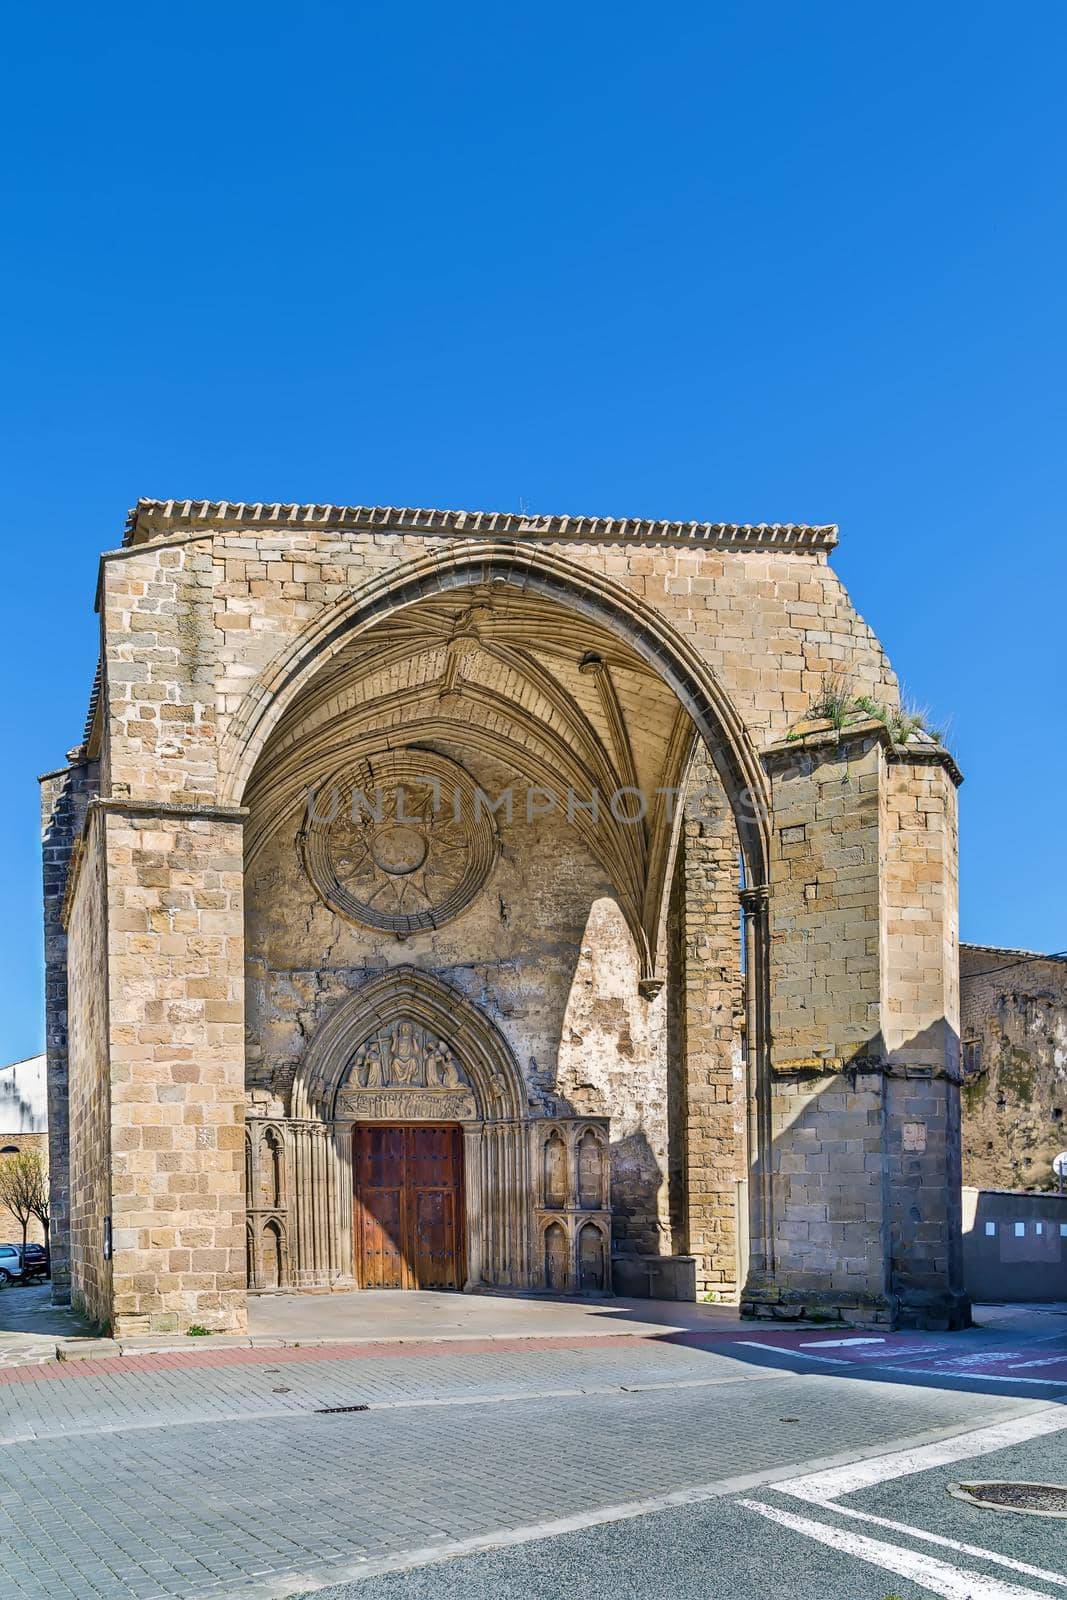 Church of San Salvador was built at the end of the 13th century in Gothic style, Sanguesa, Spain